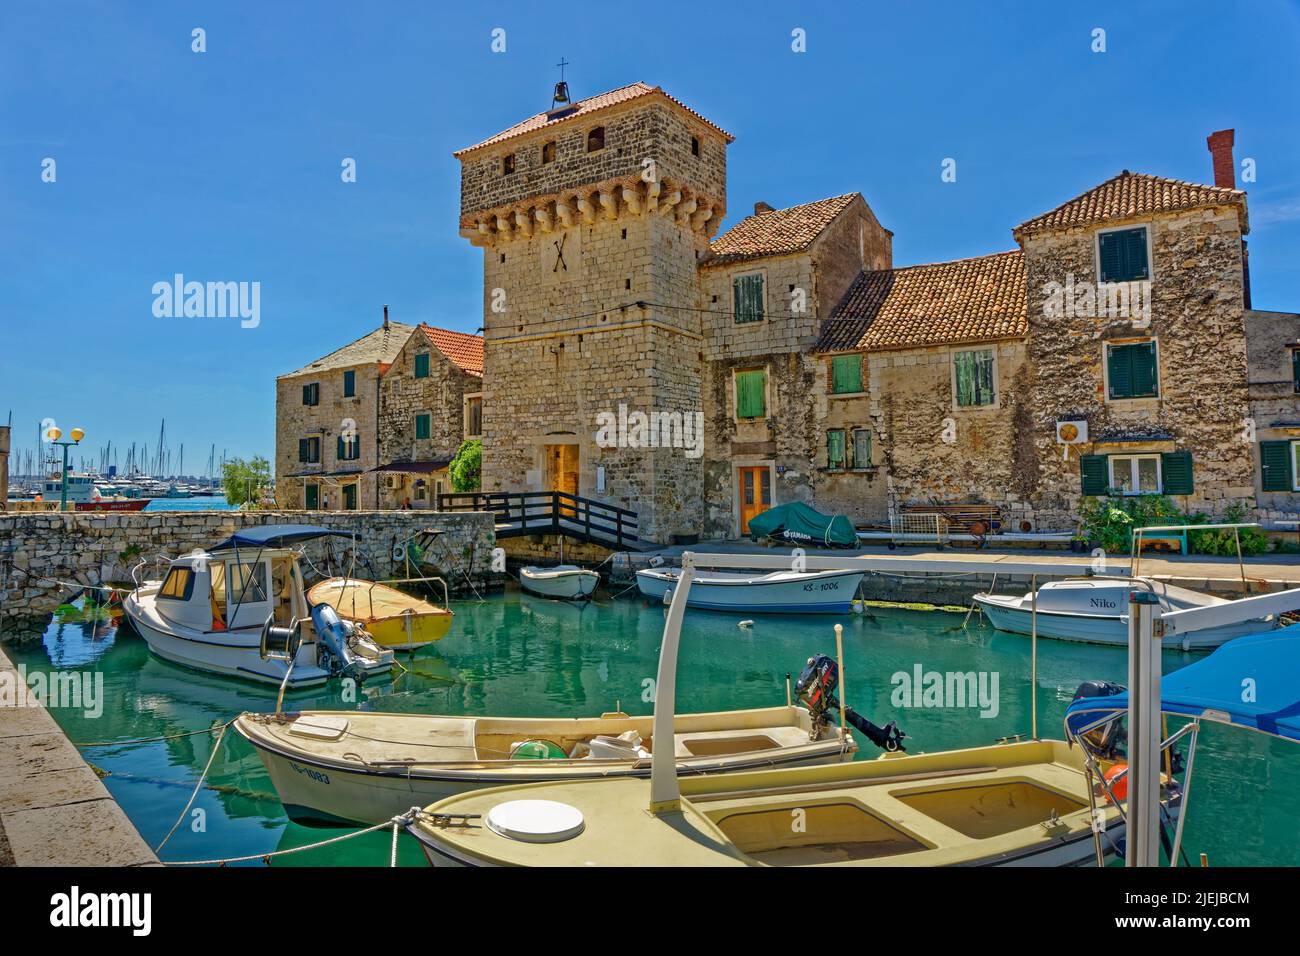 Gomilica castle at Kastela between Split and Trogir in the Central Dalmatian region of Croatia. It featured as Braavos in the 'Game of Thrones' series Stock Photo